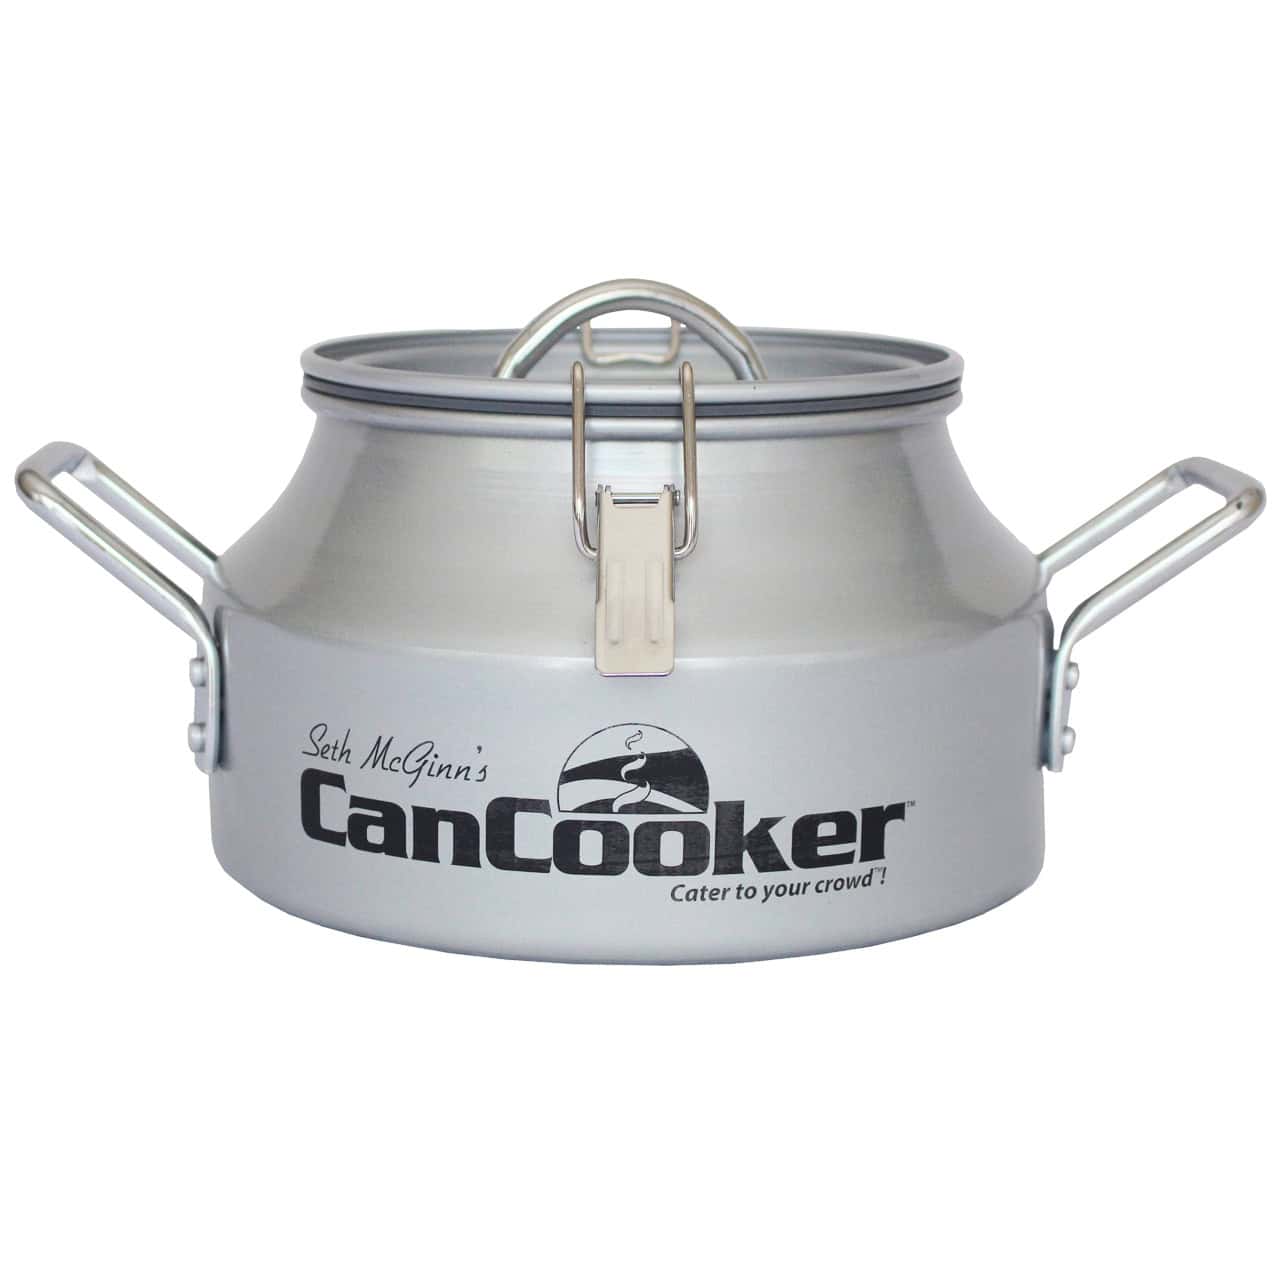 Outdoors Unlimited Camping CanCooker Companion, Silver, 1.5 gallon Capacity